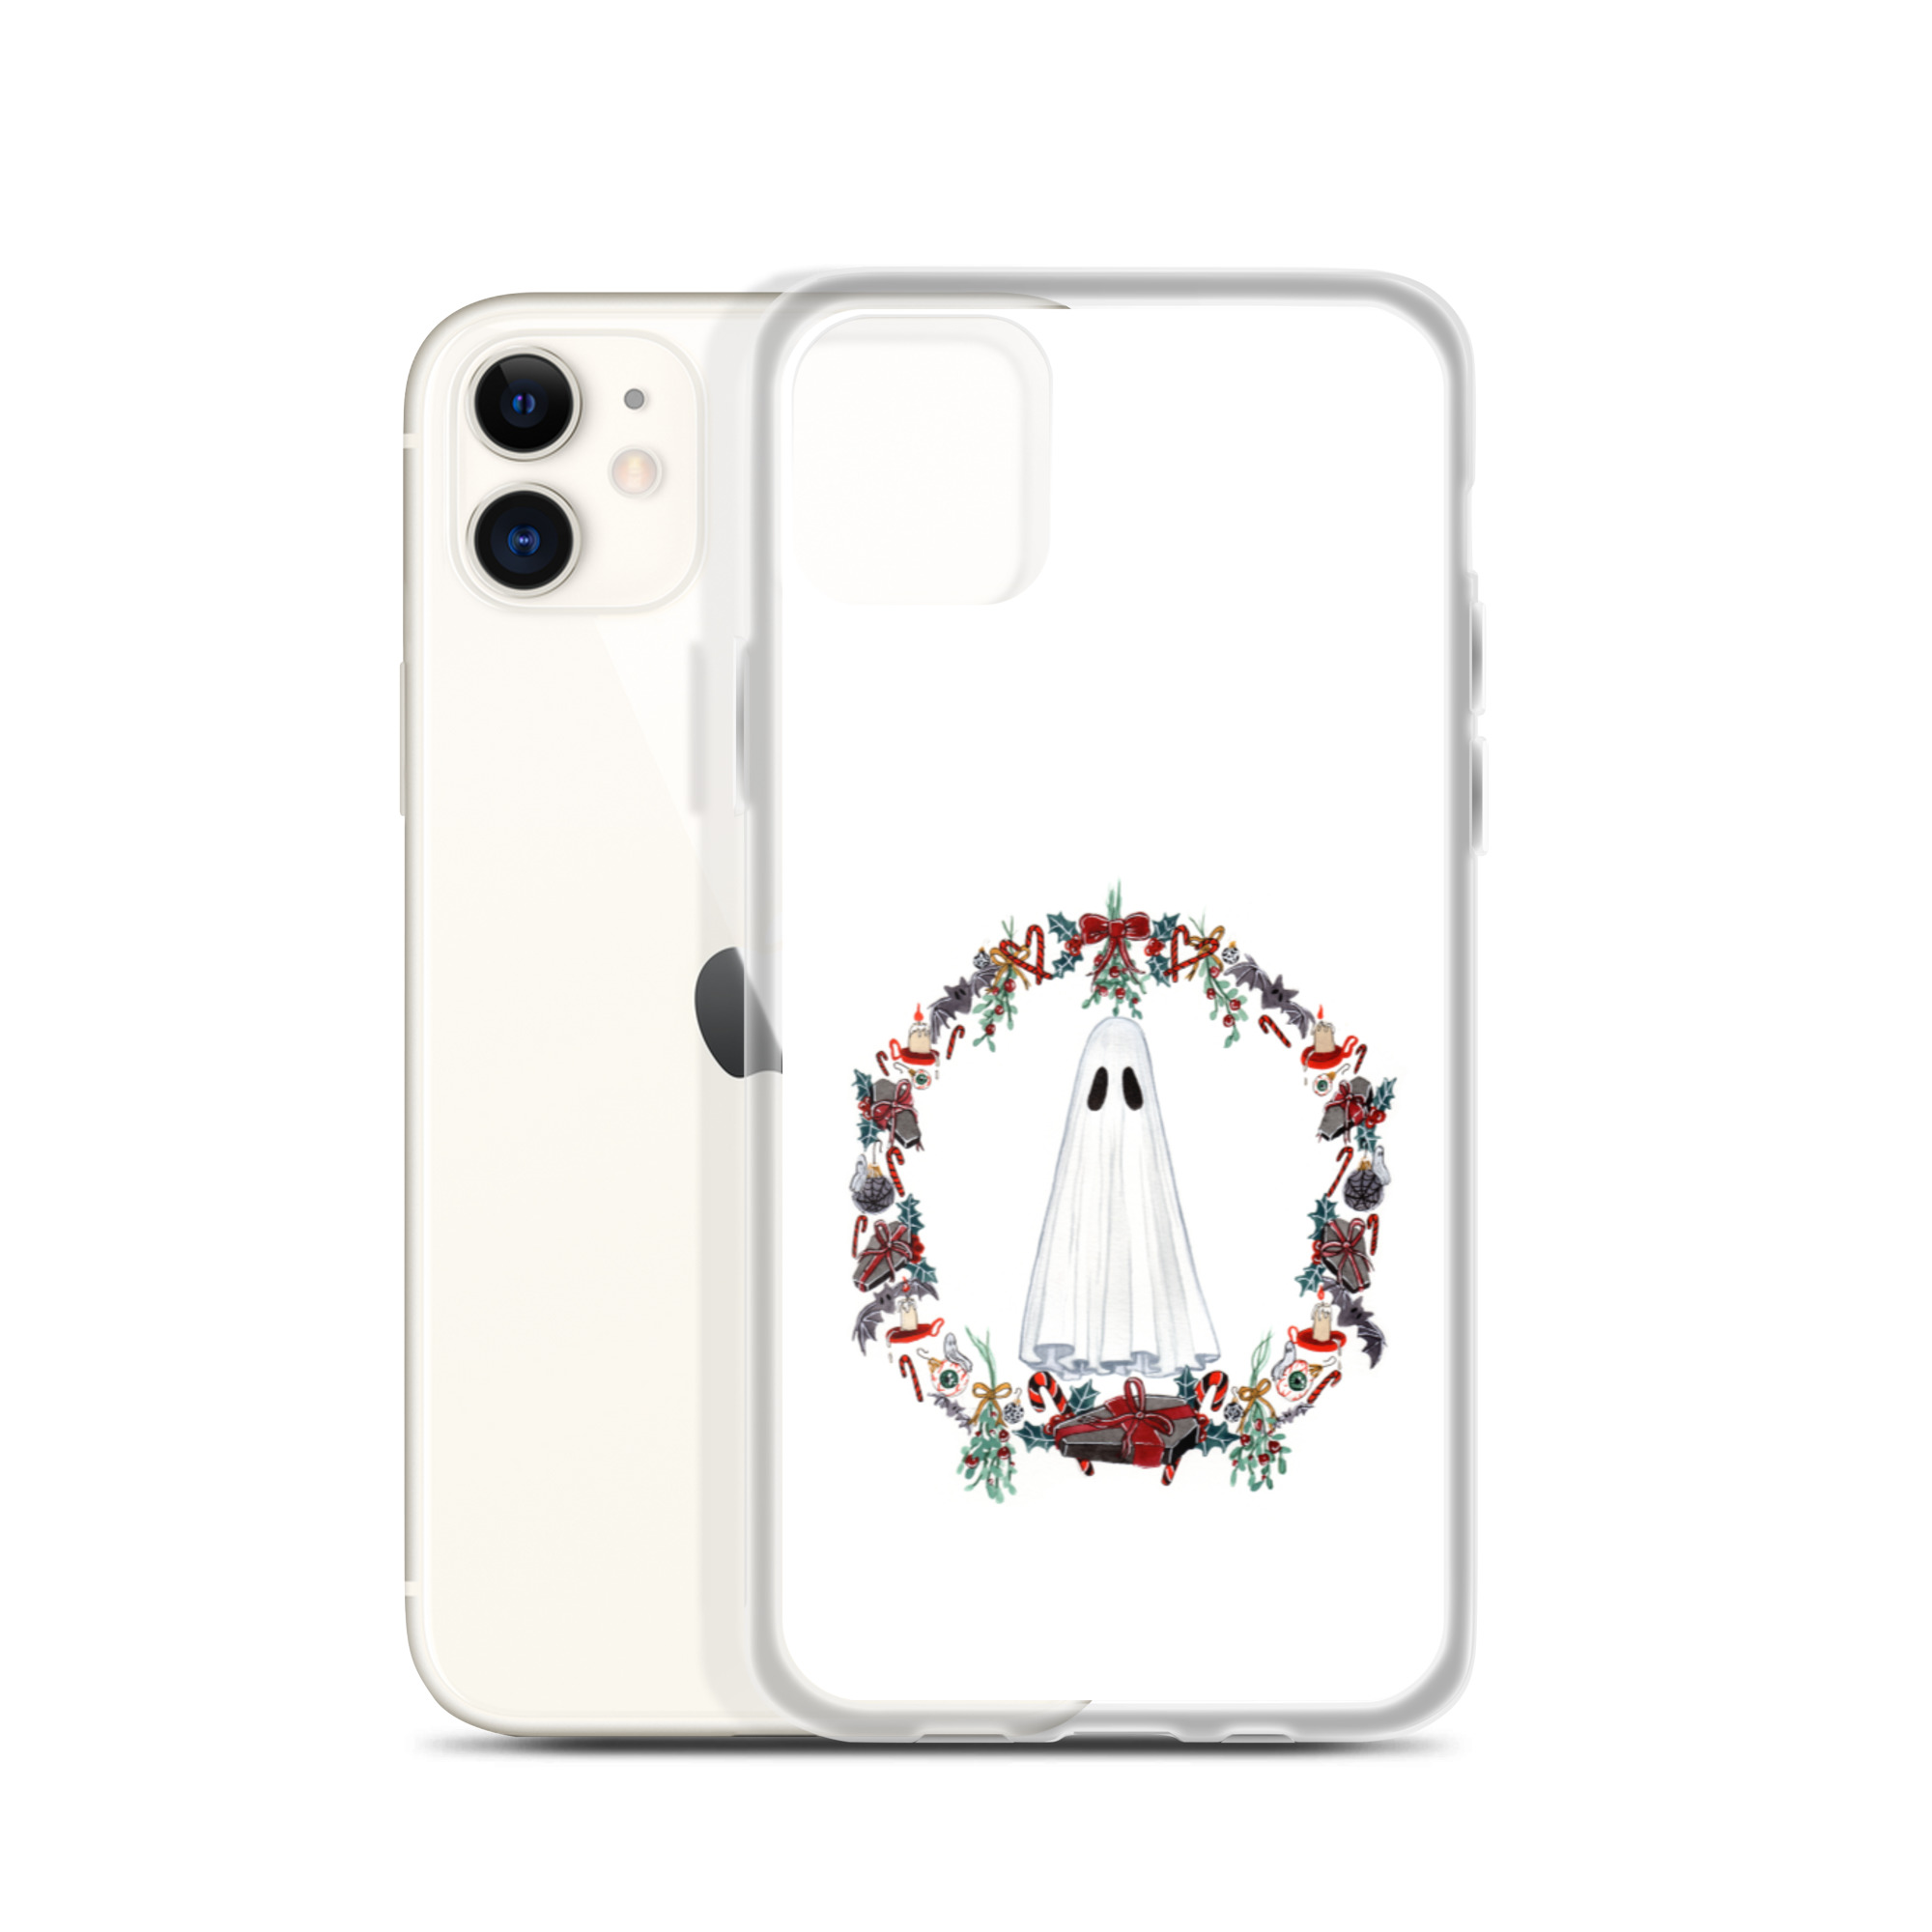 iphone-case-iphone-11-case-with-phone-636d7782b654e.jpg